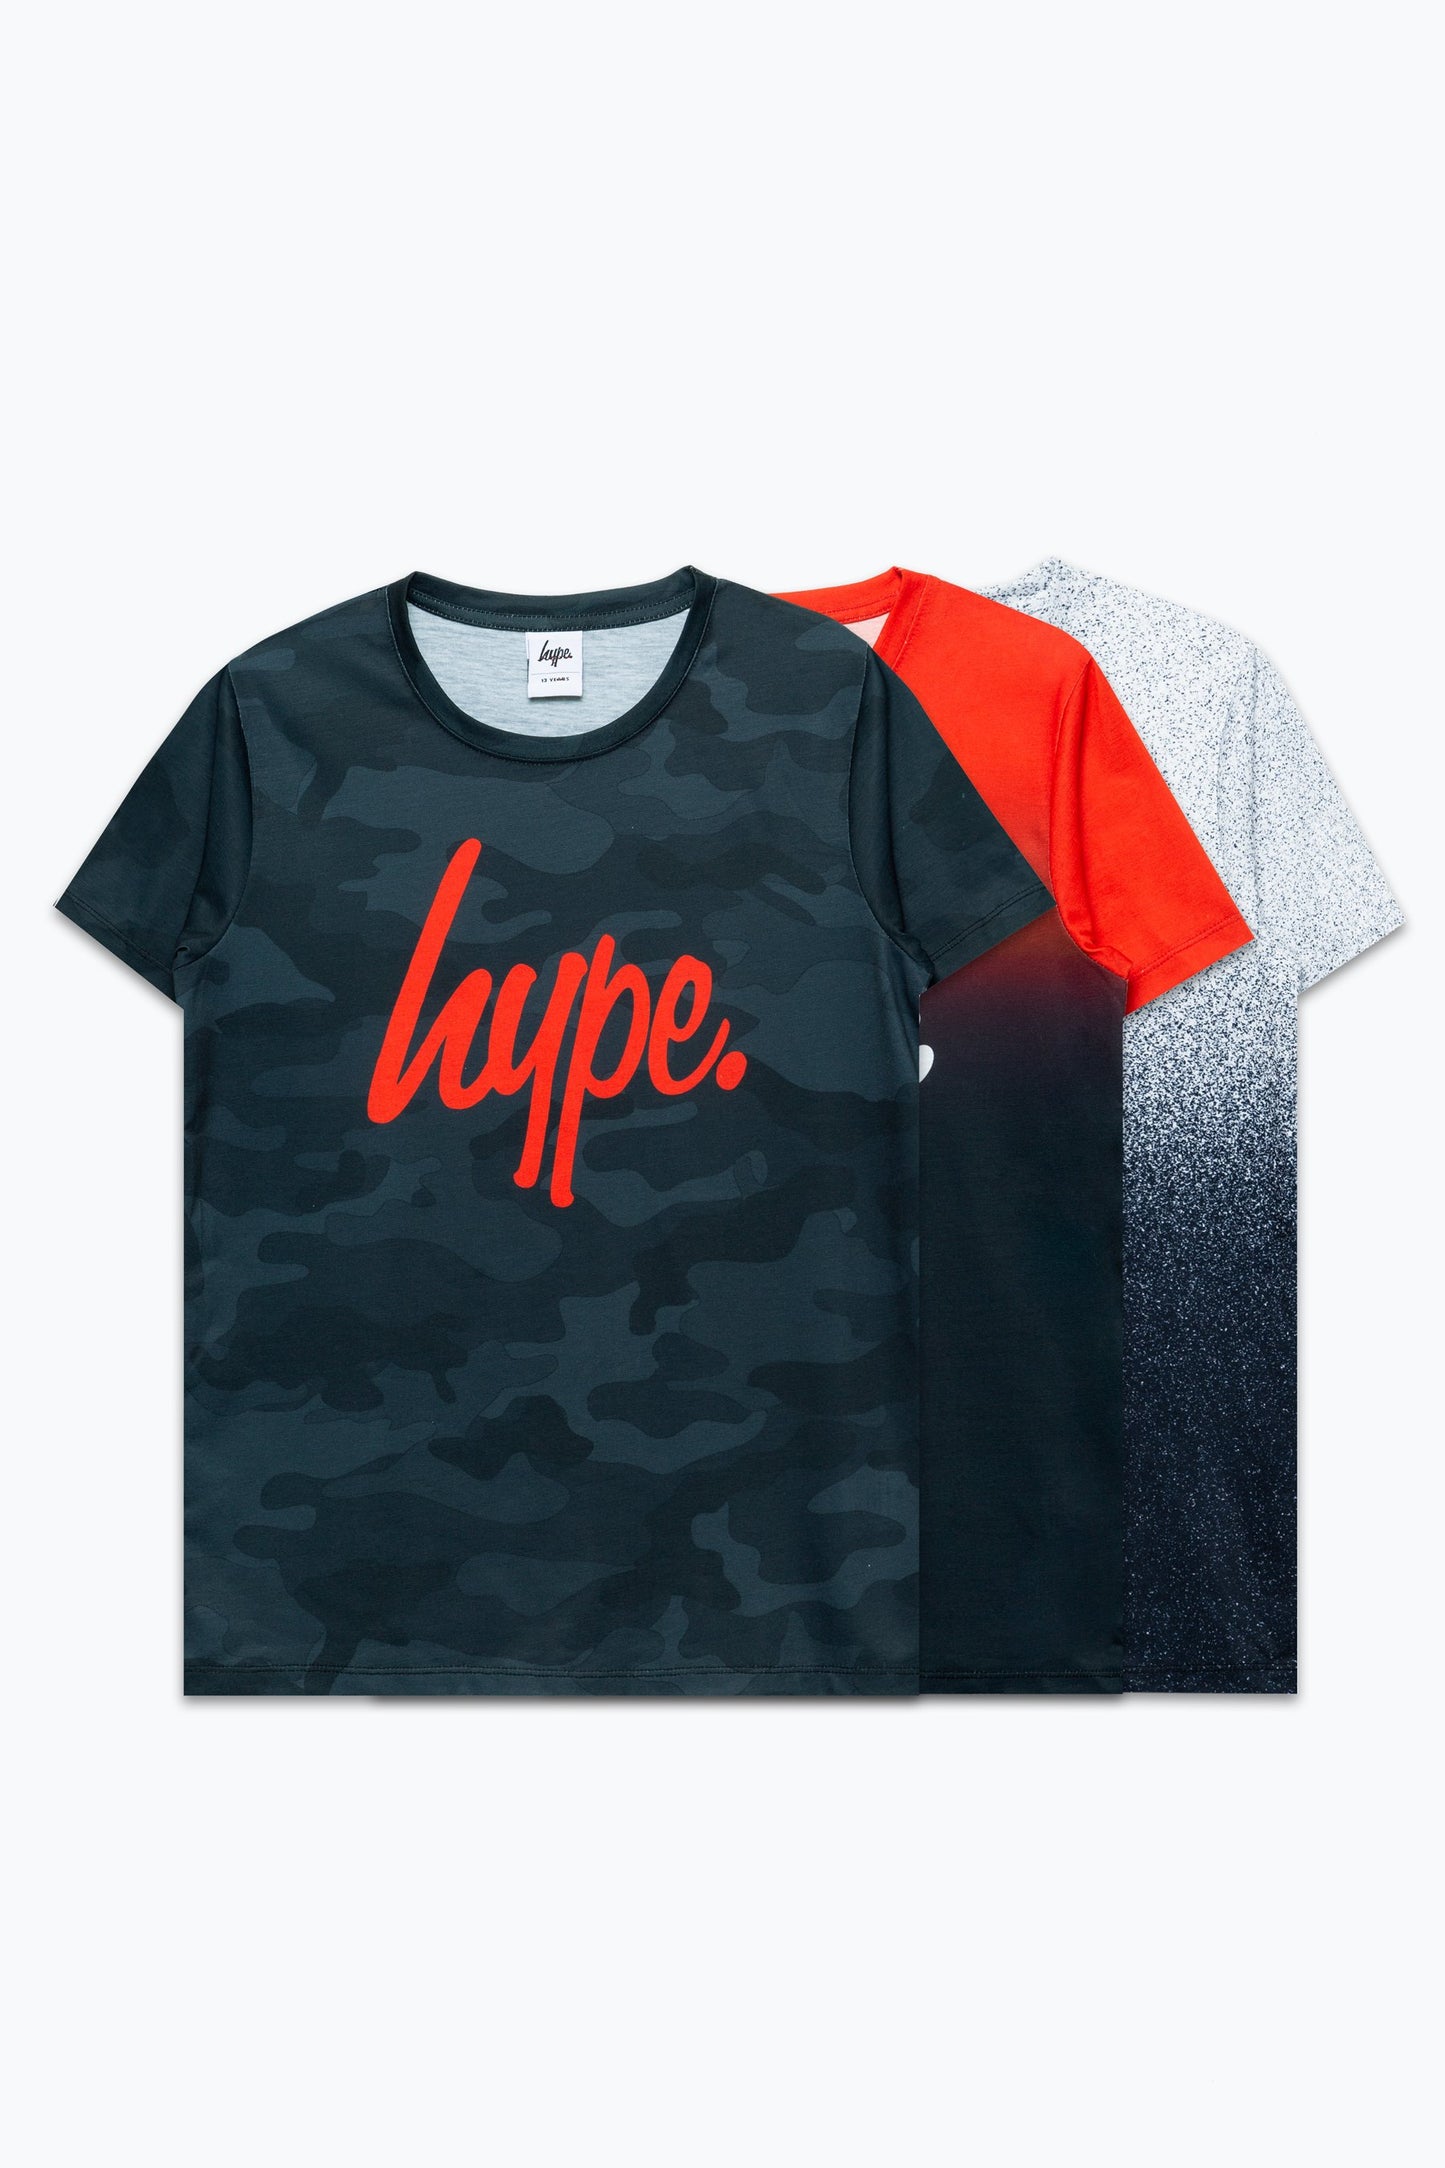 HYPE THREE PACK SPECKLE FADE CAMO KIDS T-SHIRT